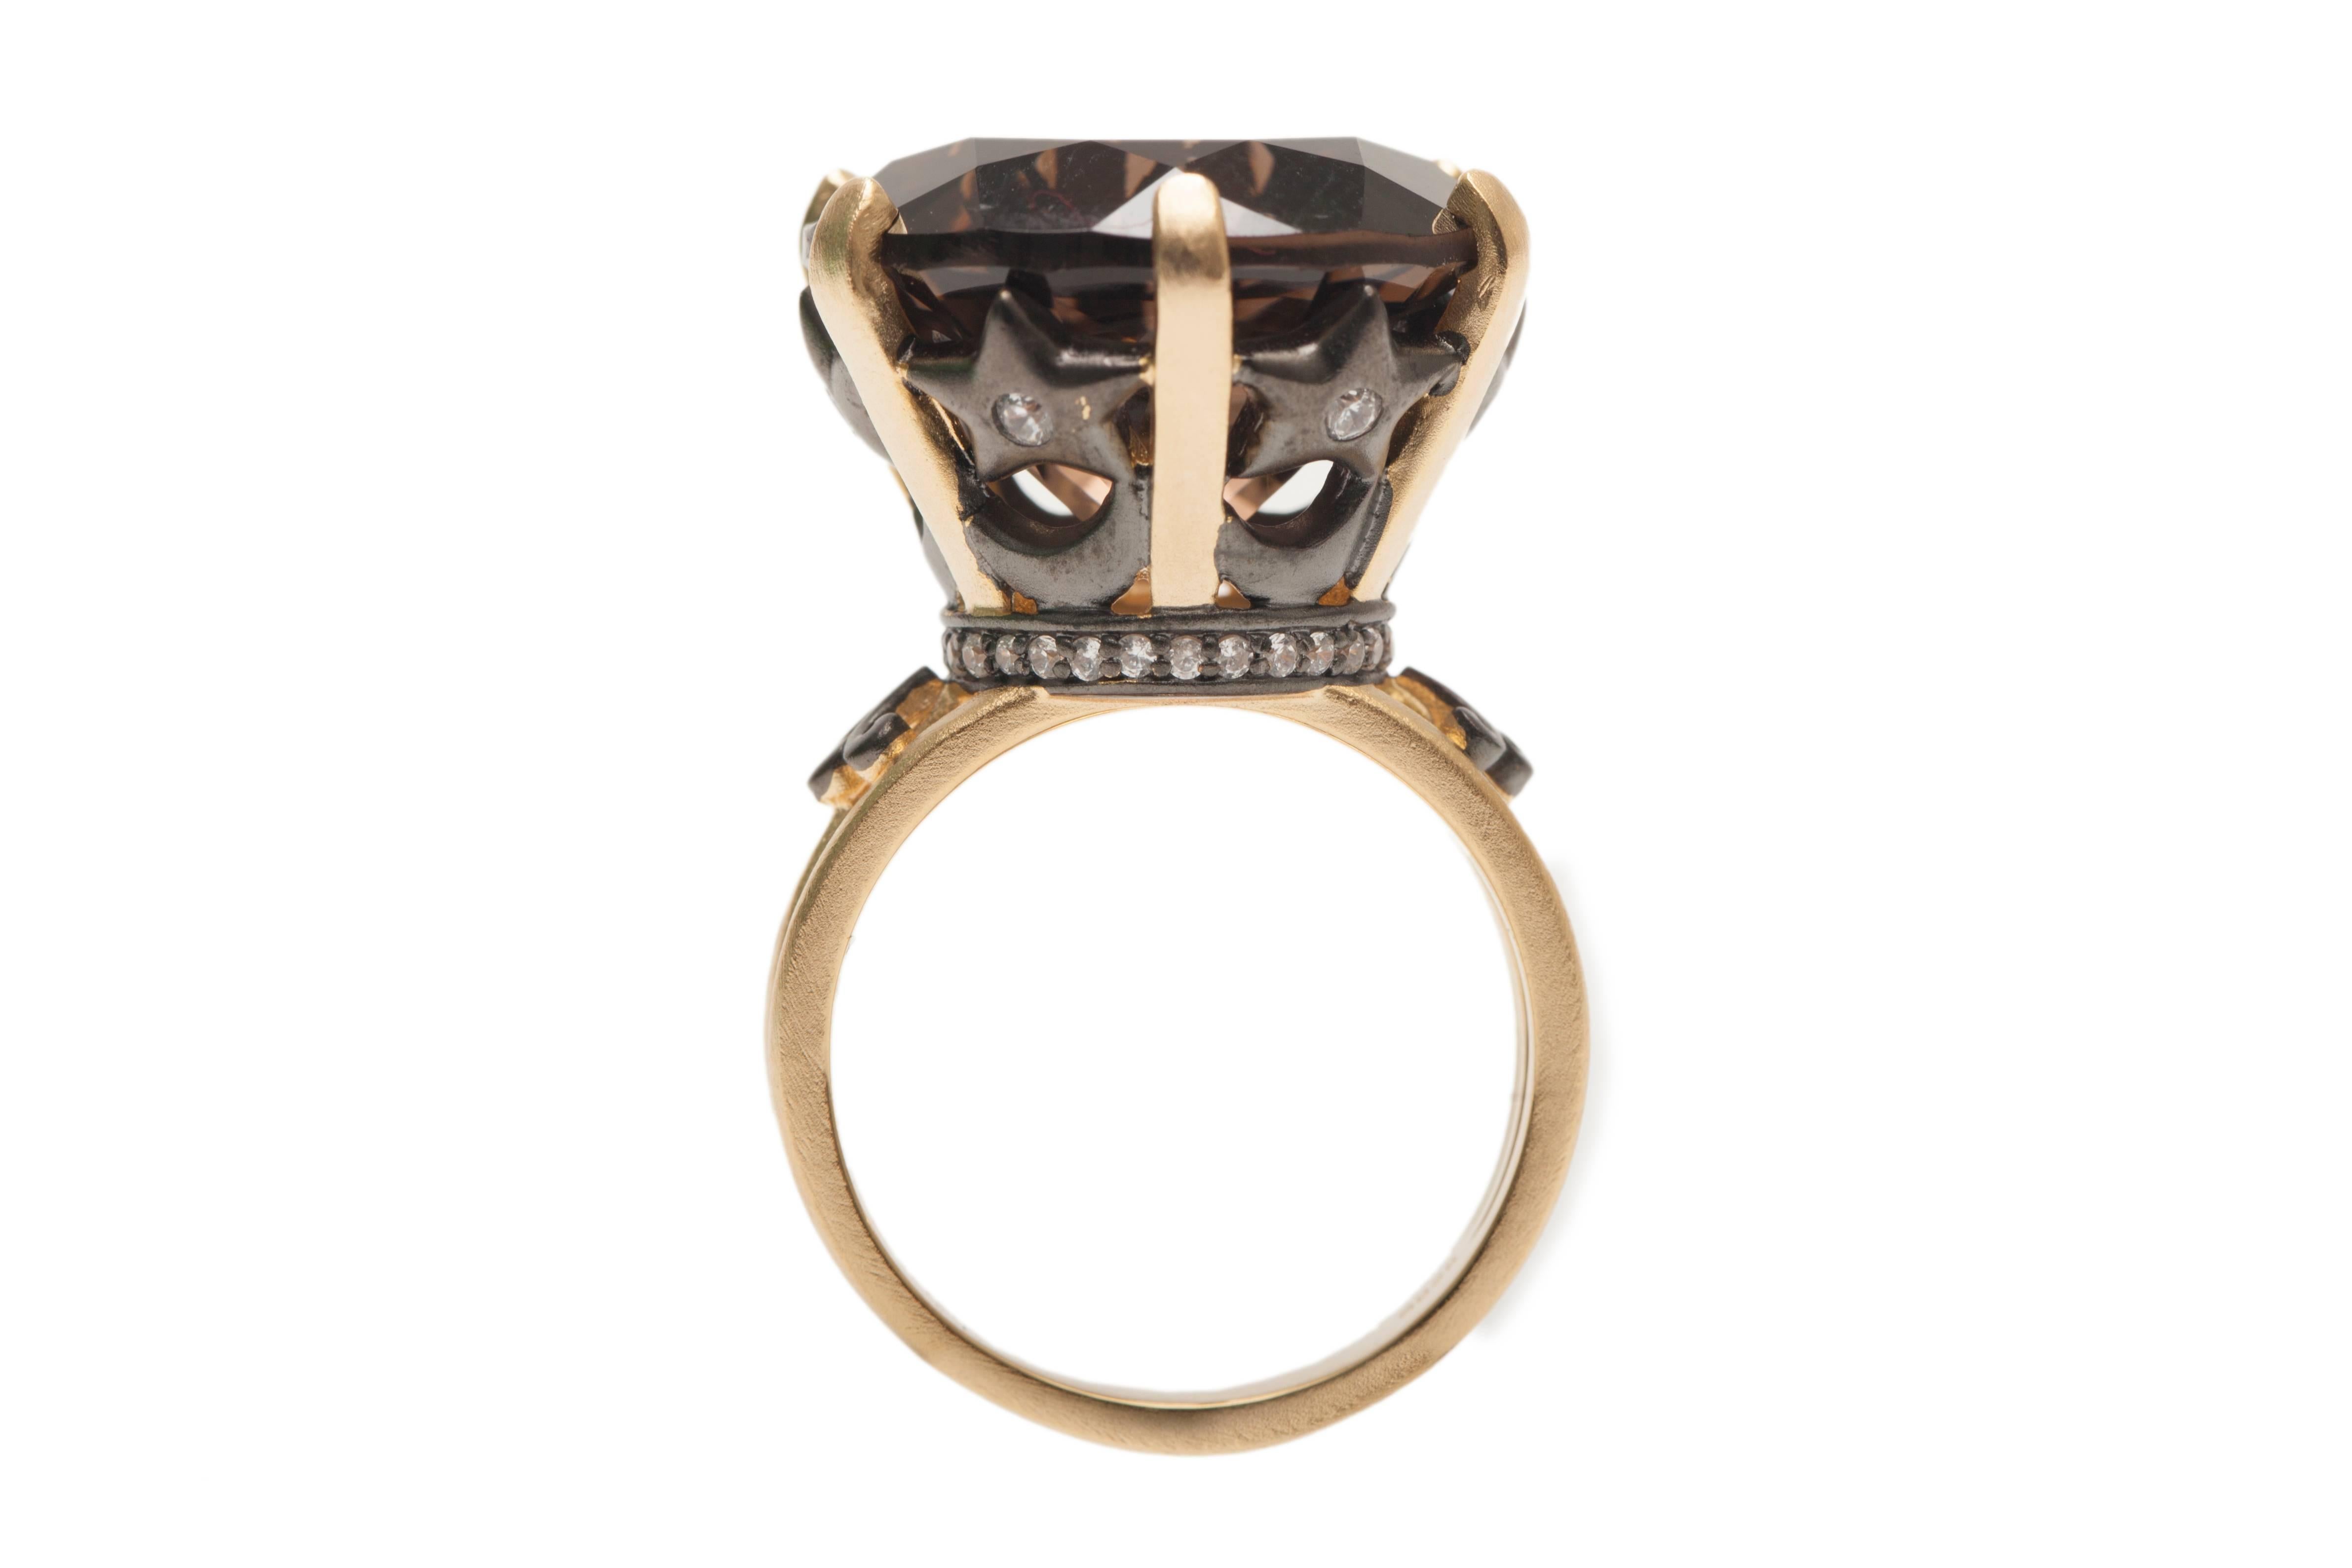 A dazzling smoky quartz 18mm hand cut Sa'mma statement ring made of vermeil gold and black ruthenium. A style and elegance with soothing powers and healing properties. 
Size (6, 7,8) Special size per request.